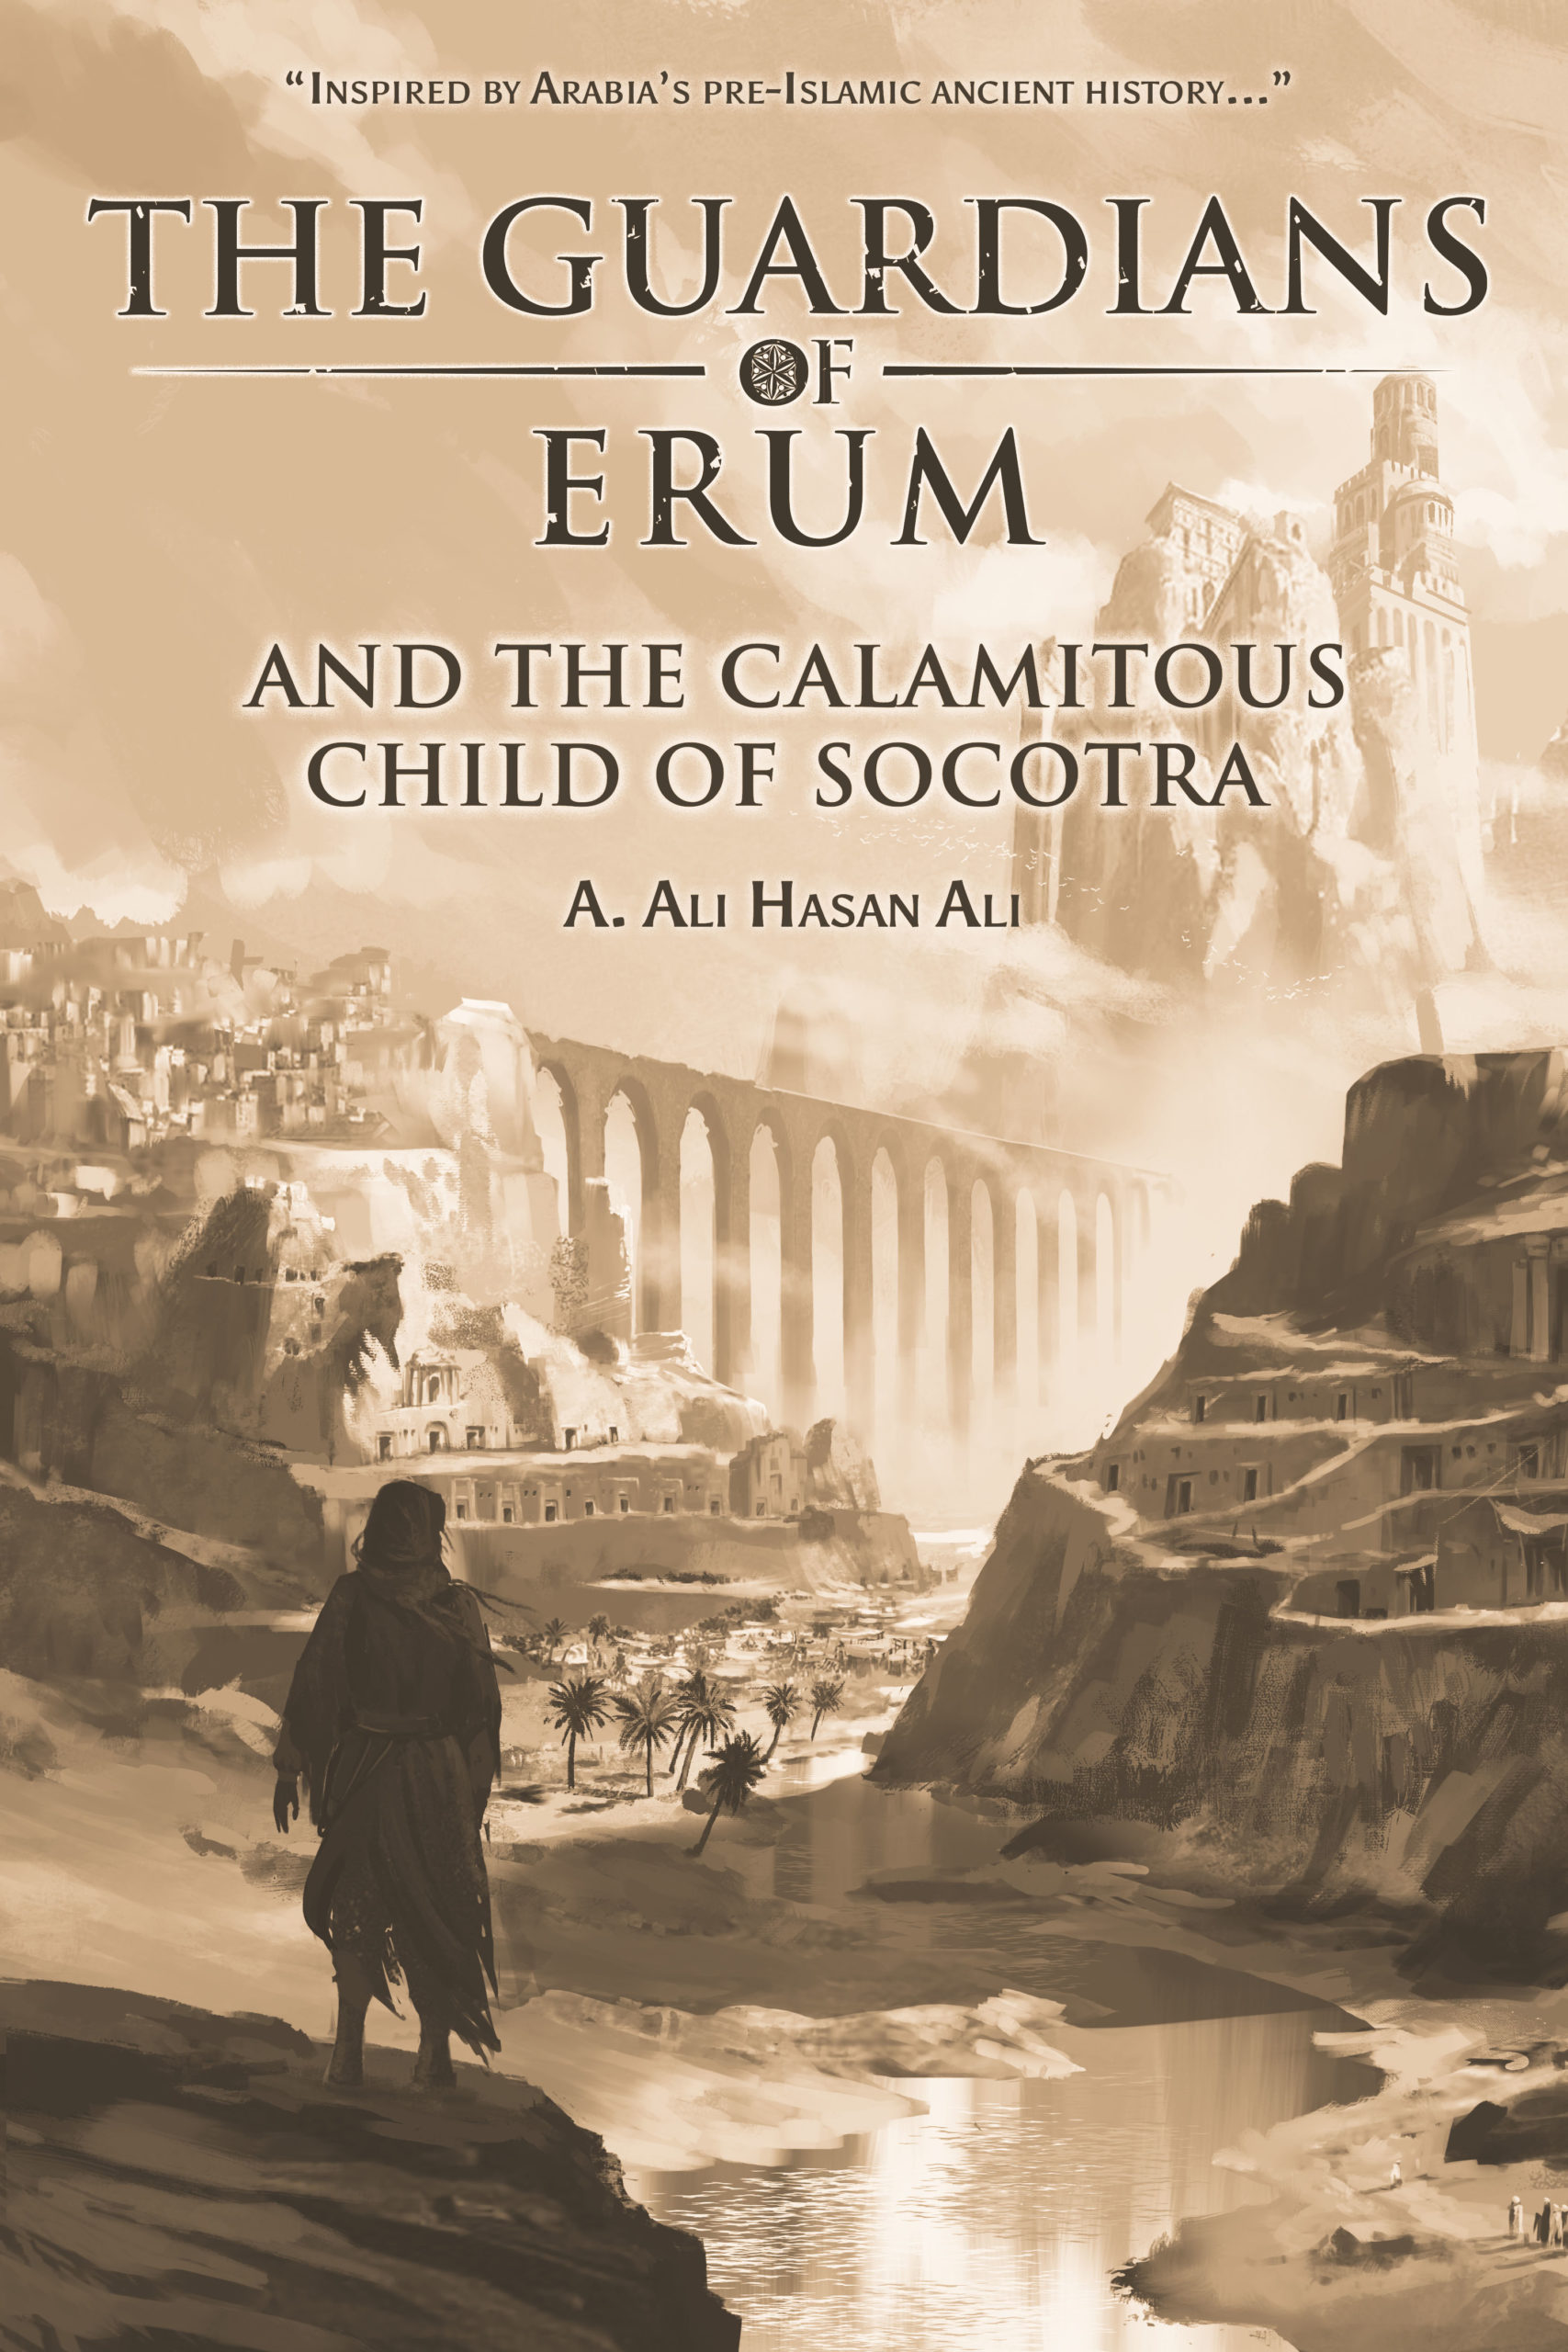 The Guardians of Erum and the Calamitous Child of Socotra